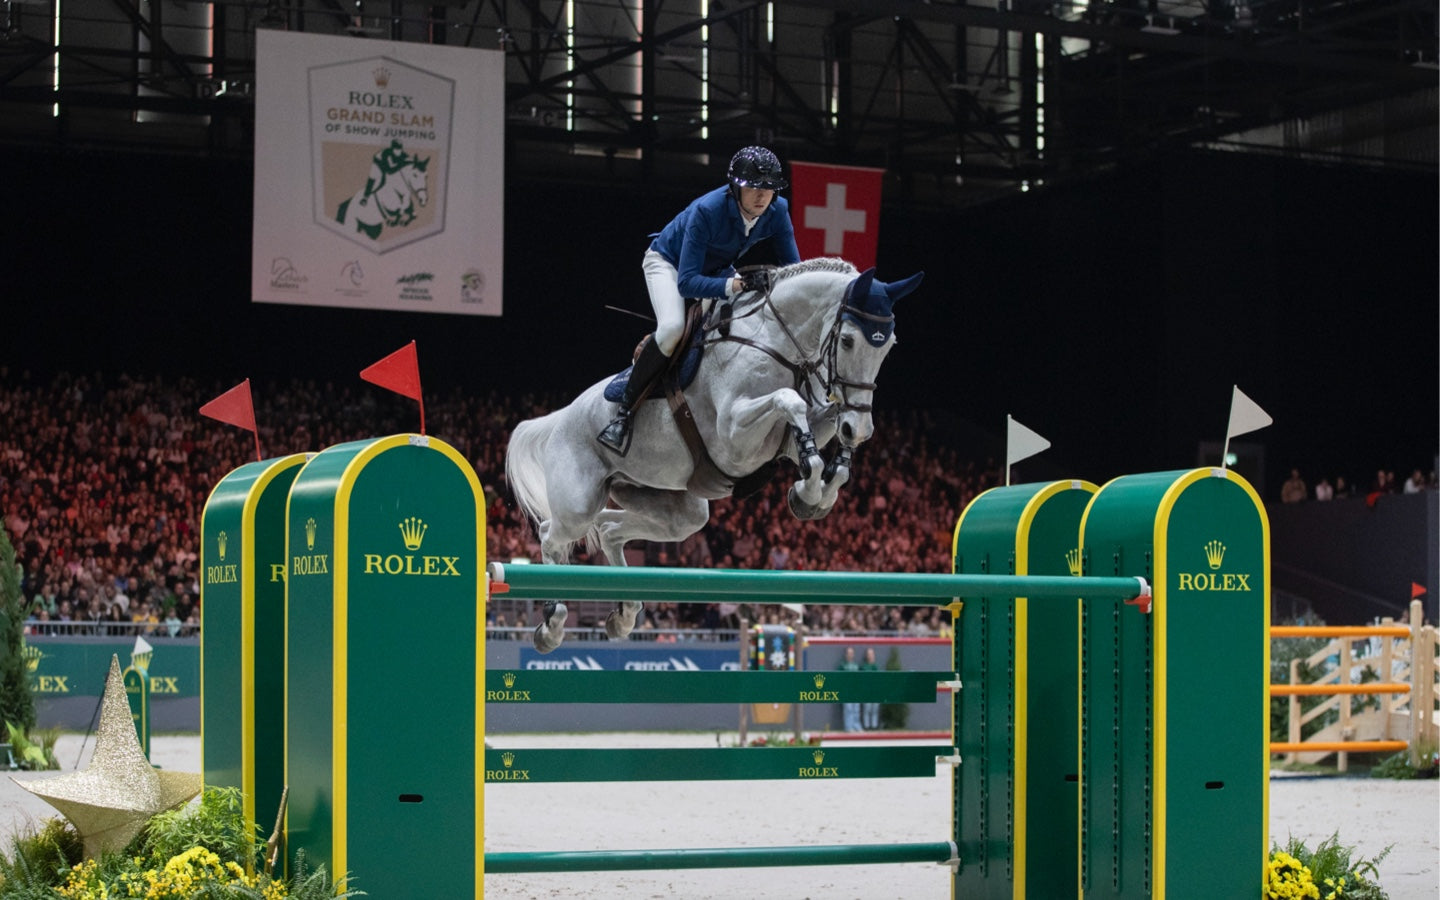 ROLEX AND EQUESTRIANISM: ROLEX GRAND SLAM OF SHOW JUMPING